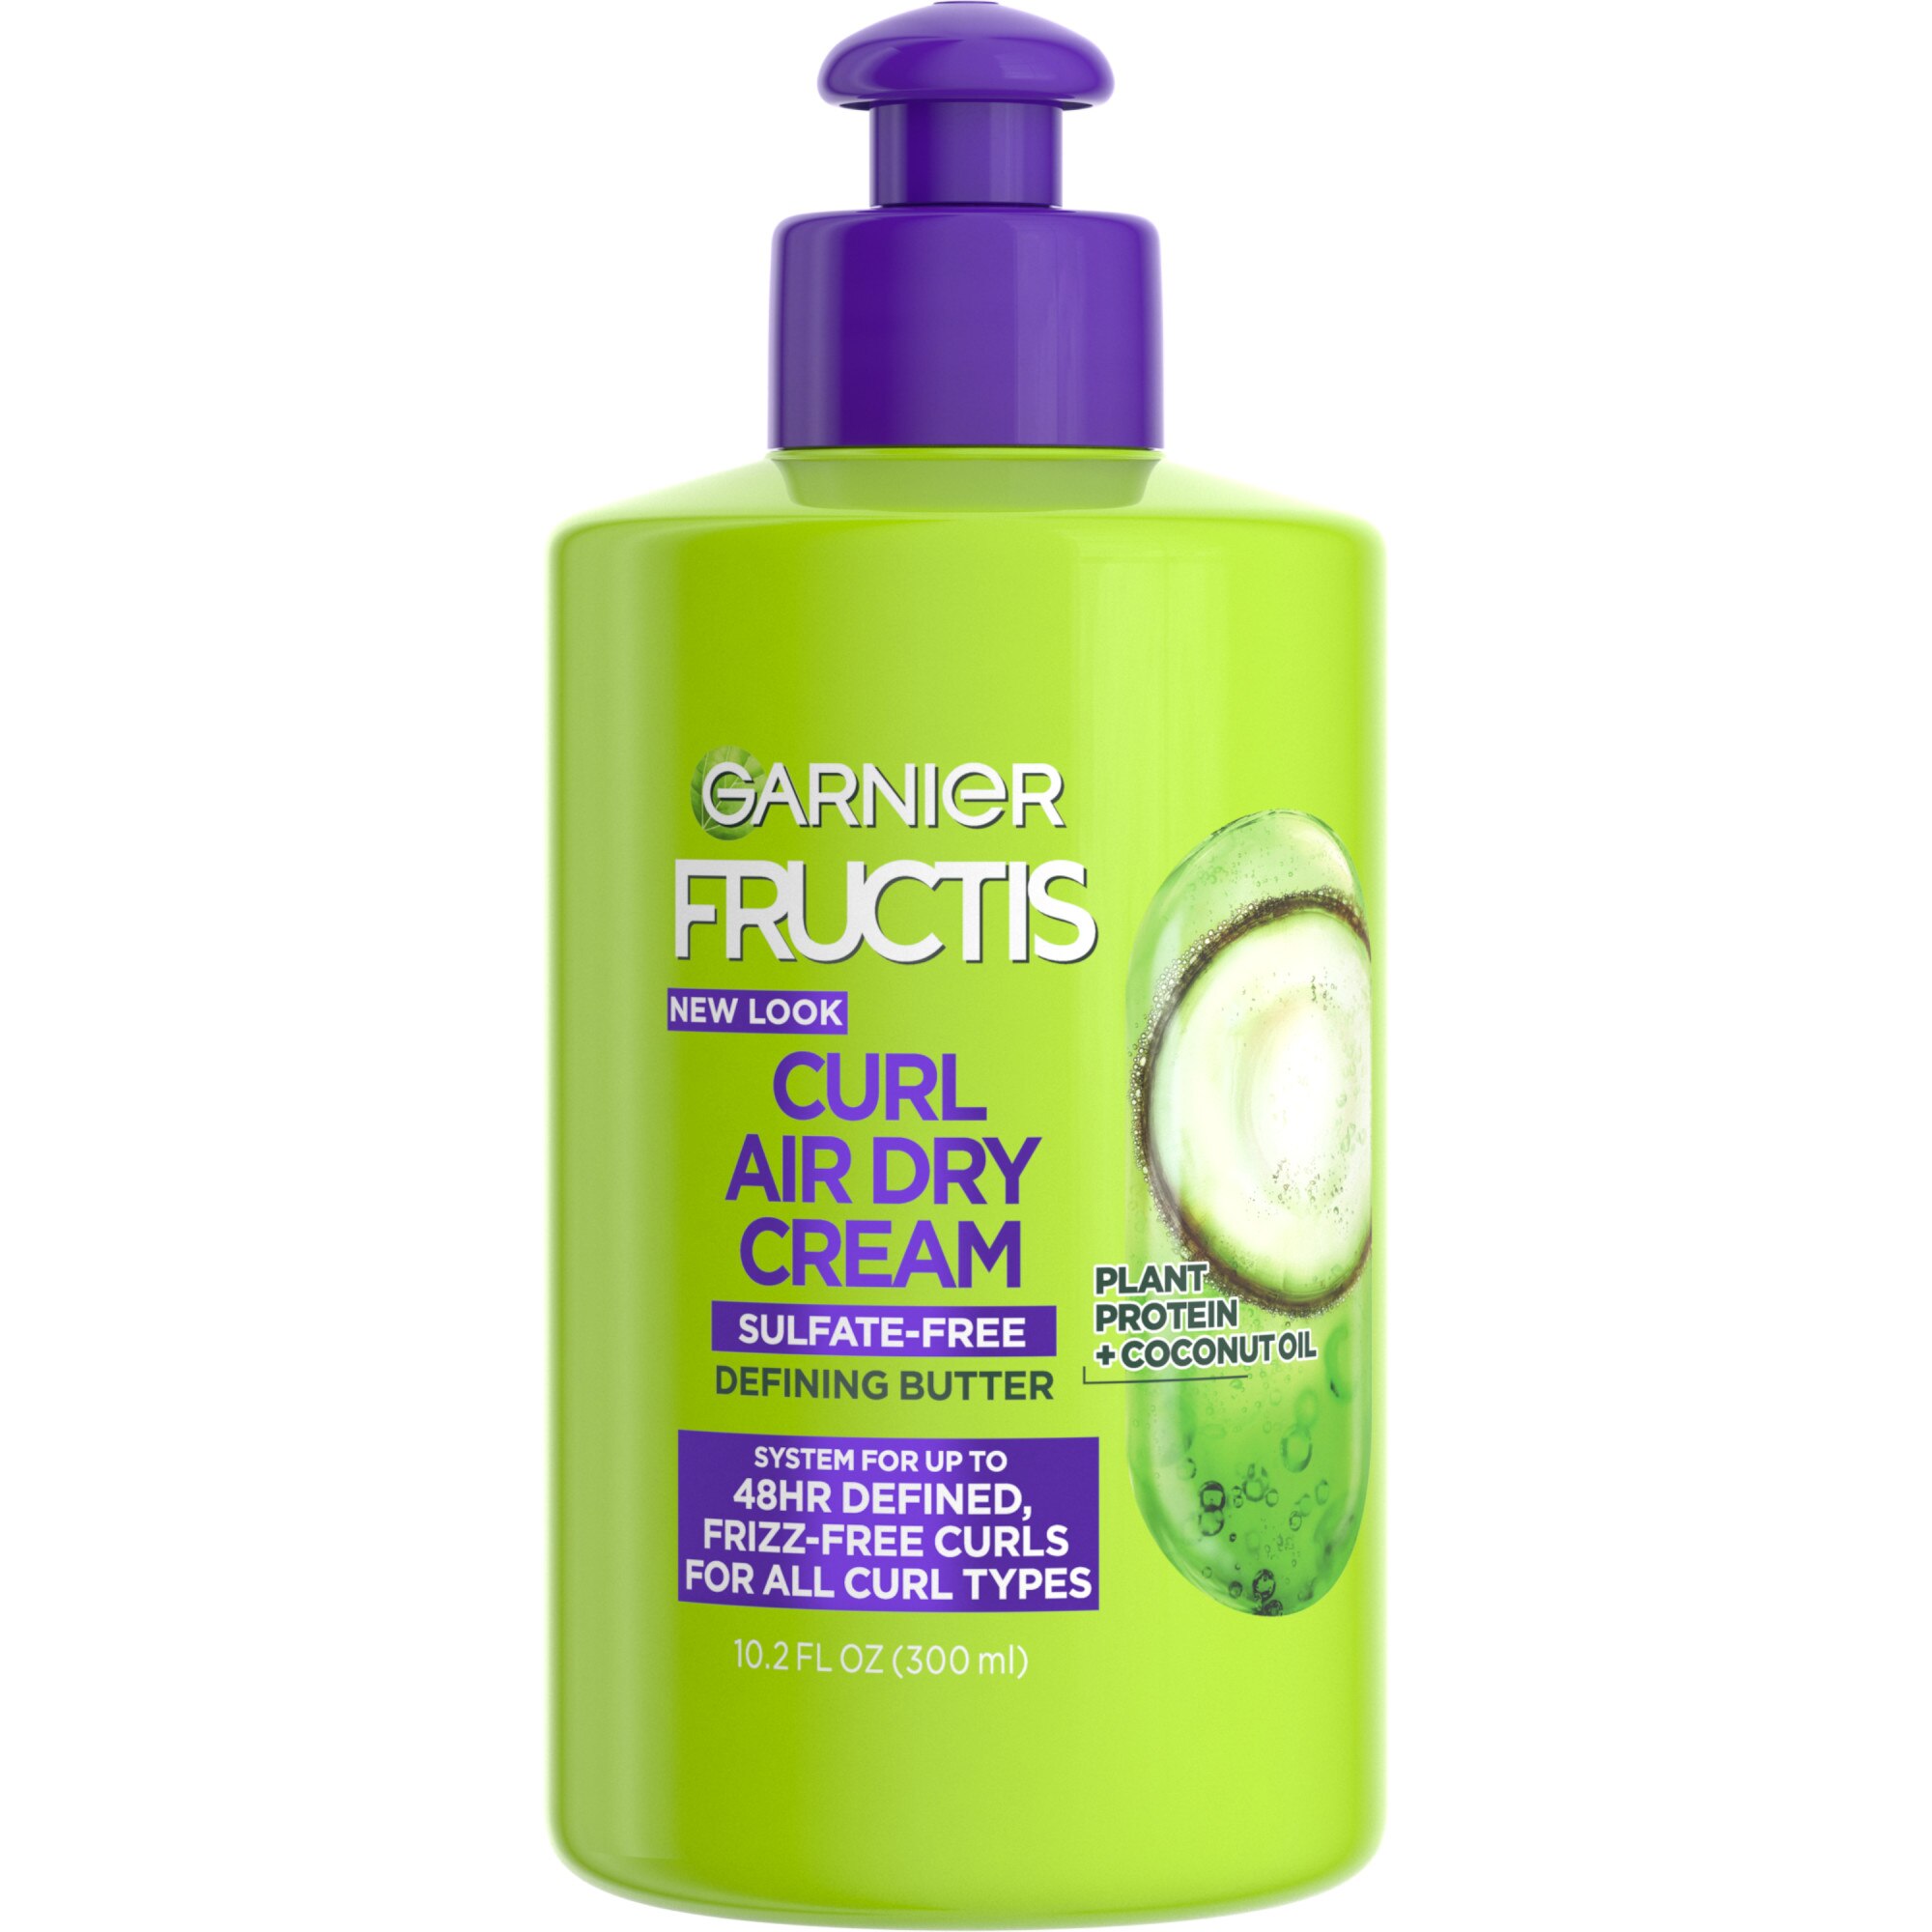 Garnier Fructis Air Dry Curl Defining Butter Cream Leave-In Treatment